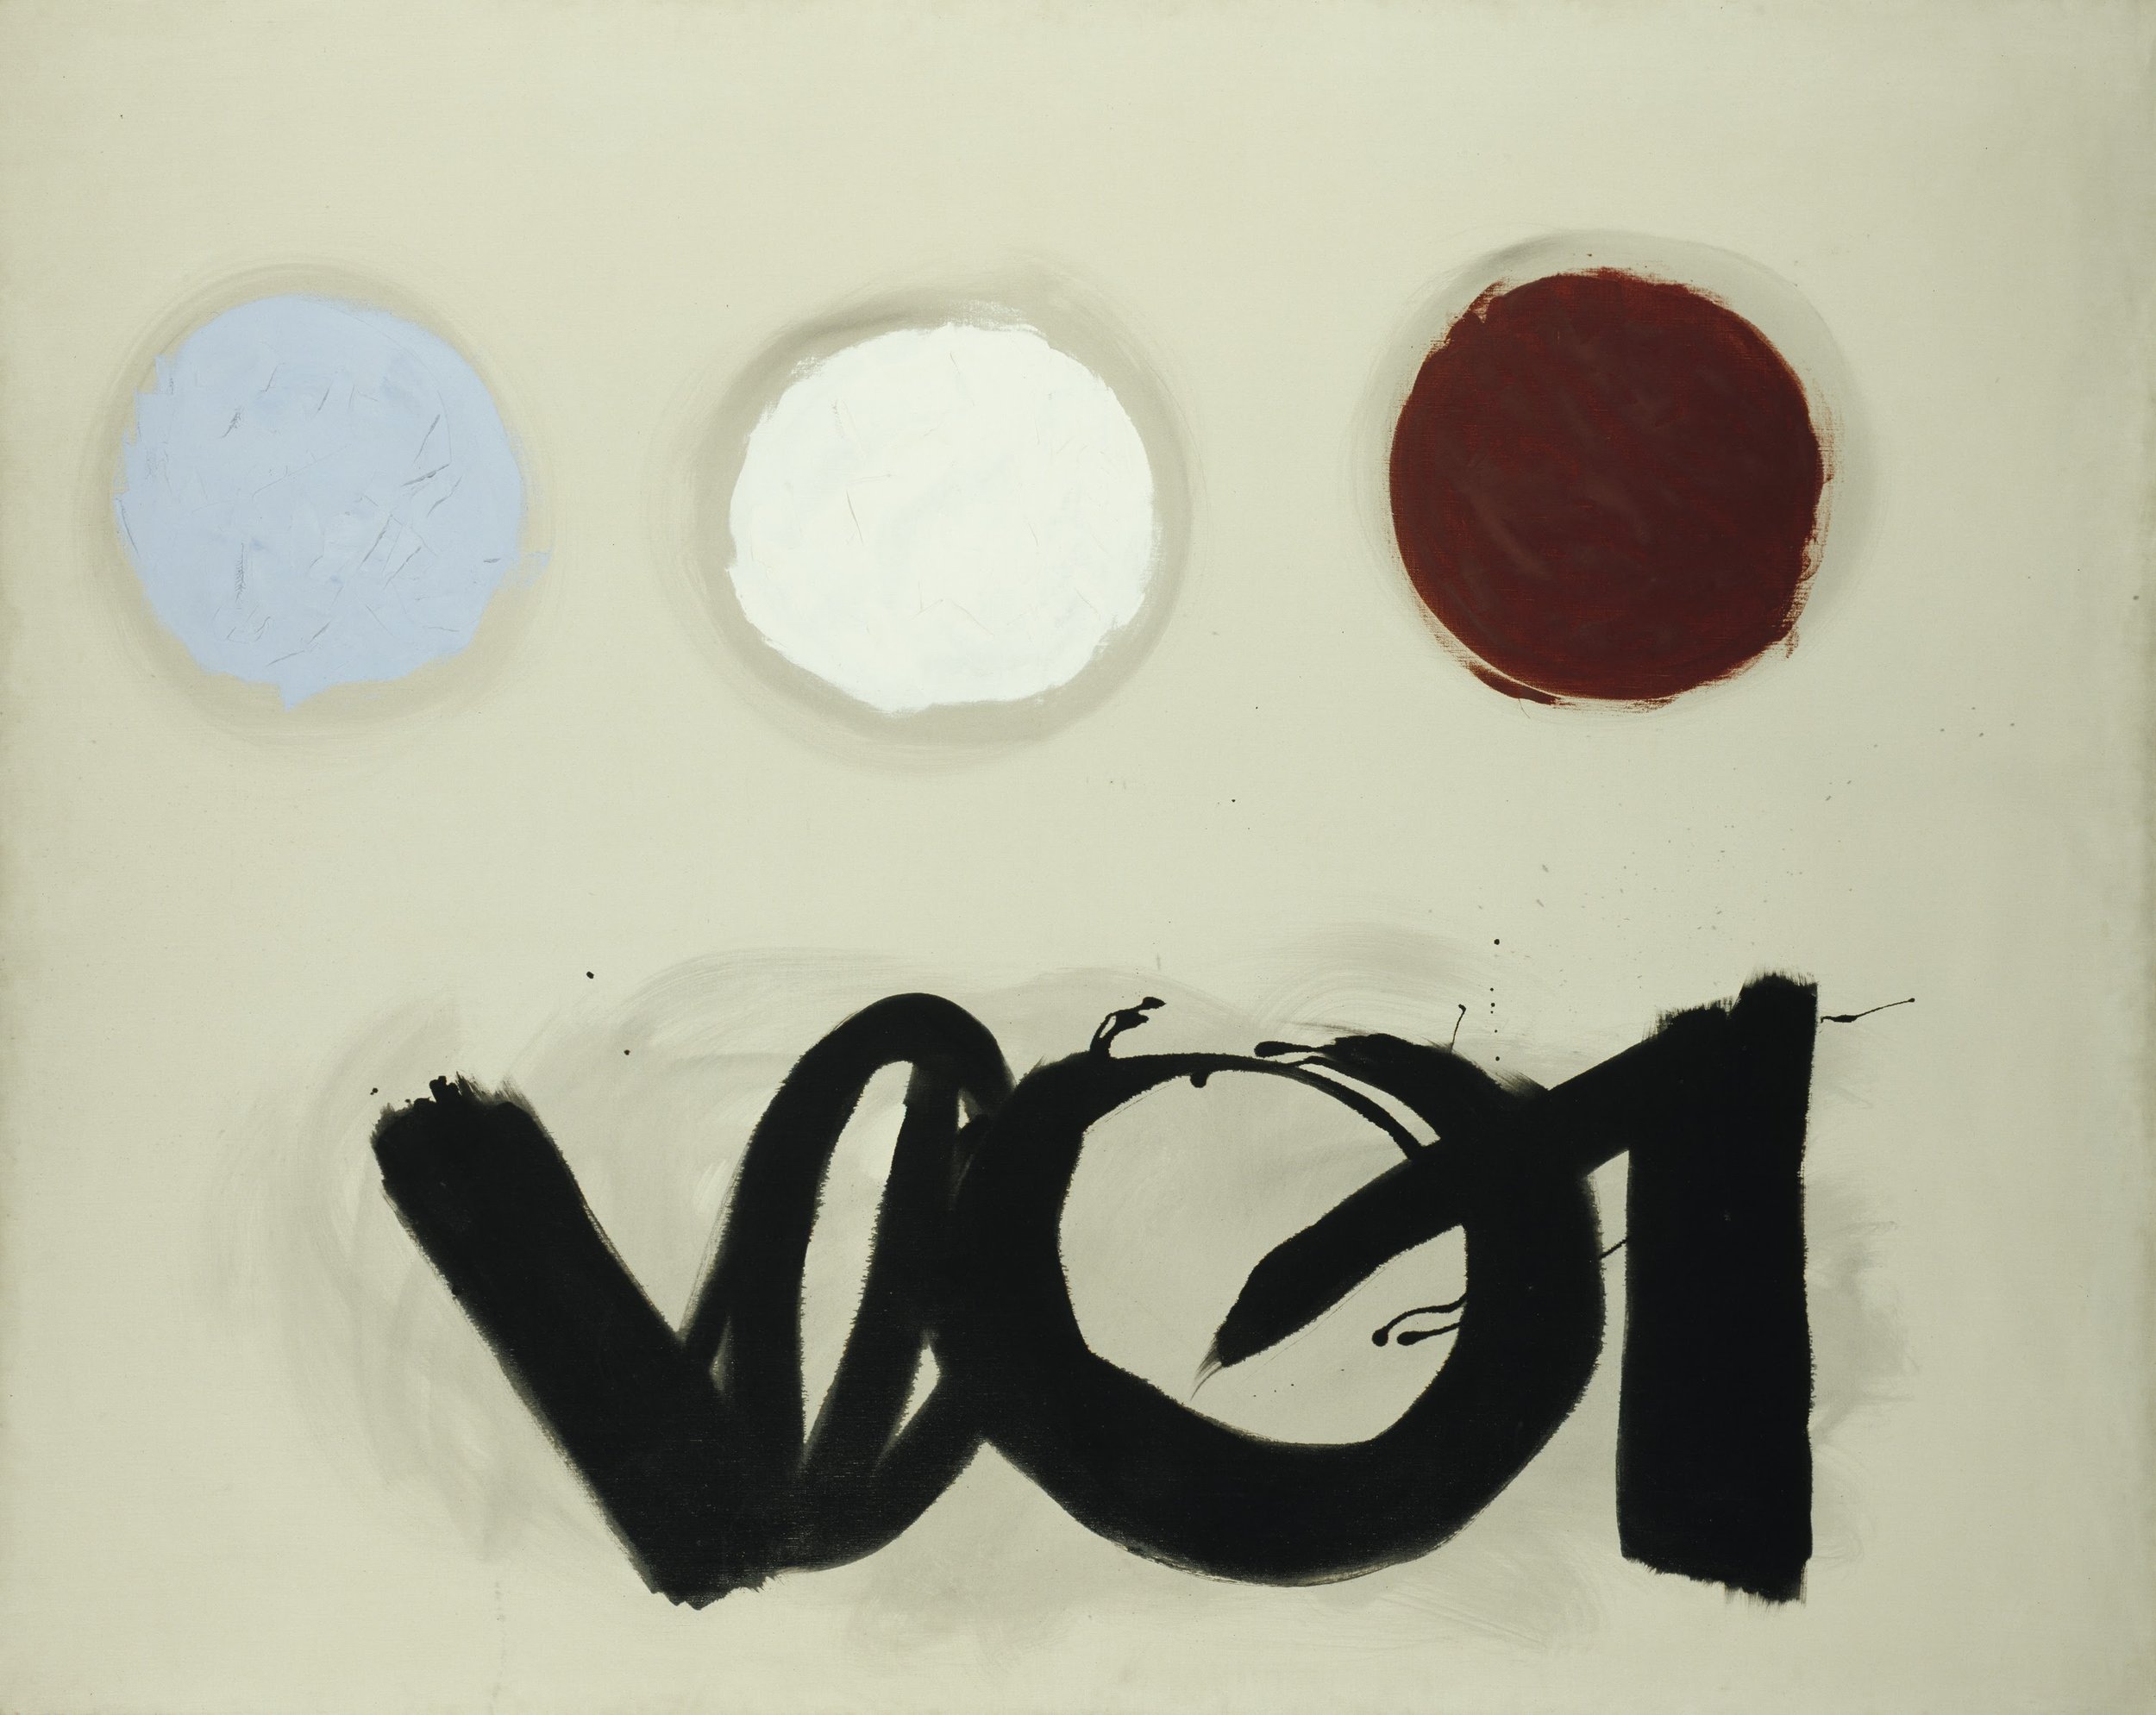 Three Discs (1960), Collection of the Smithsonian American Art Museum